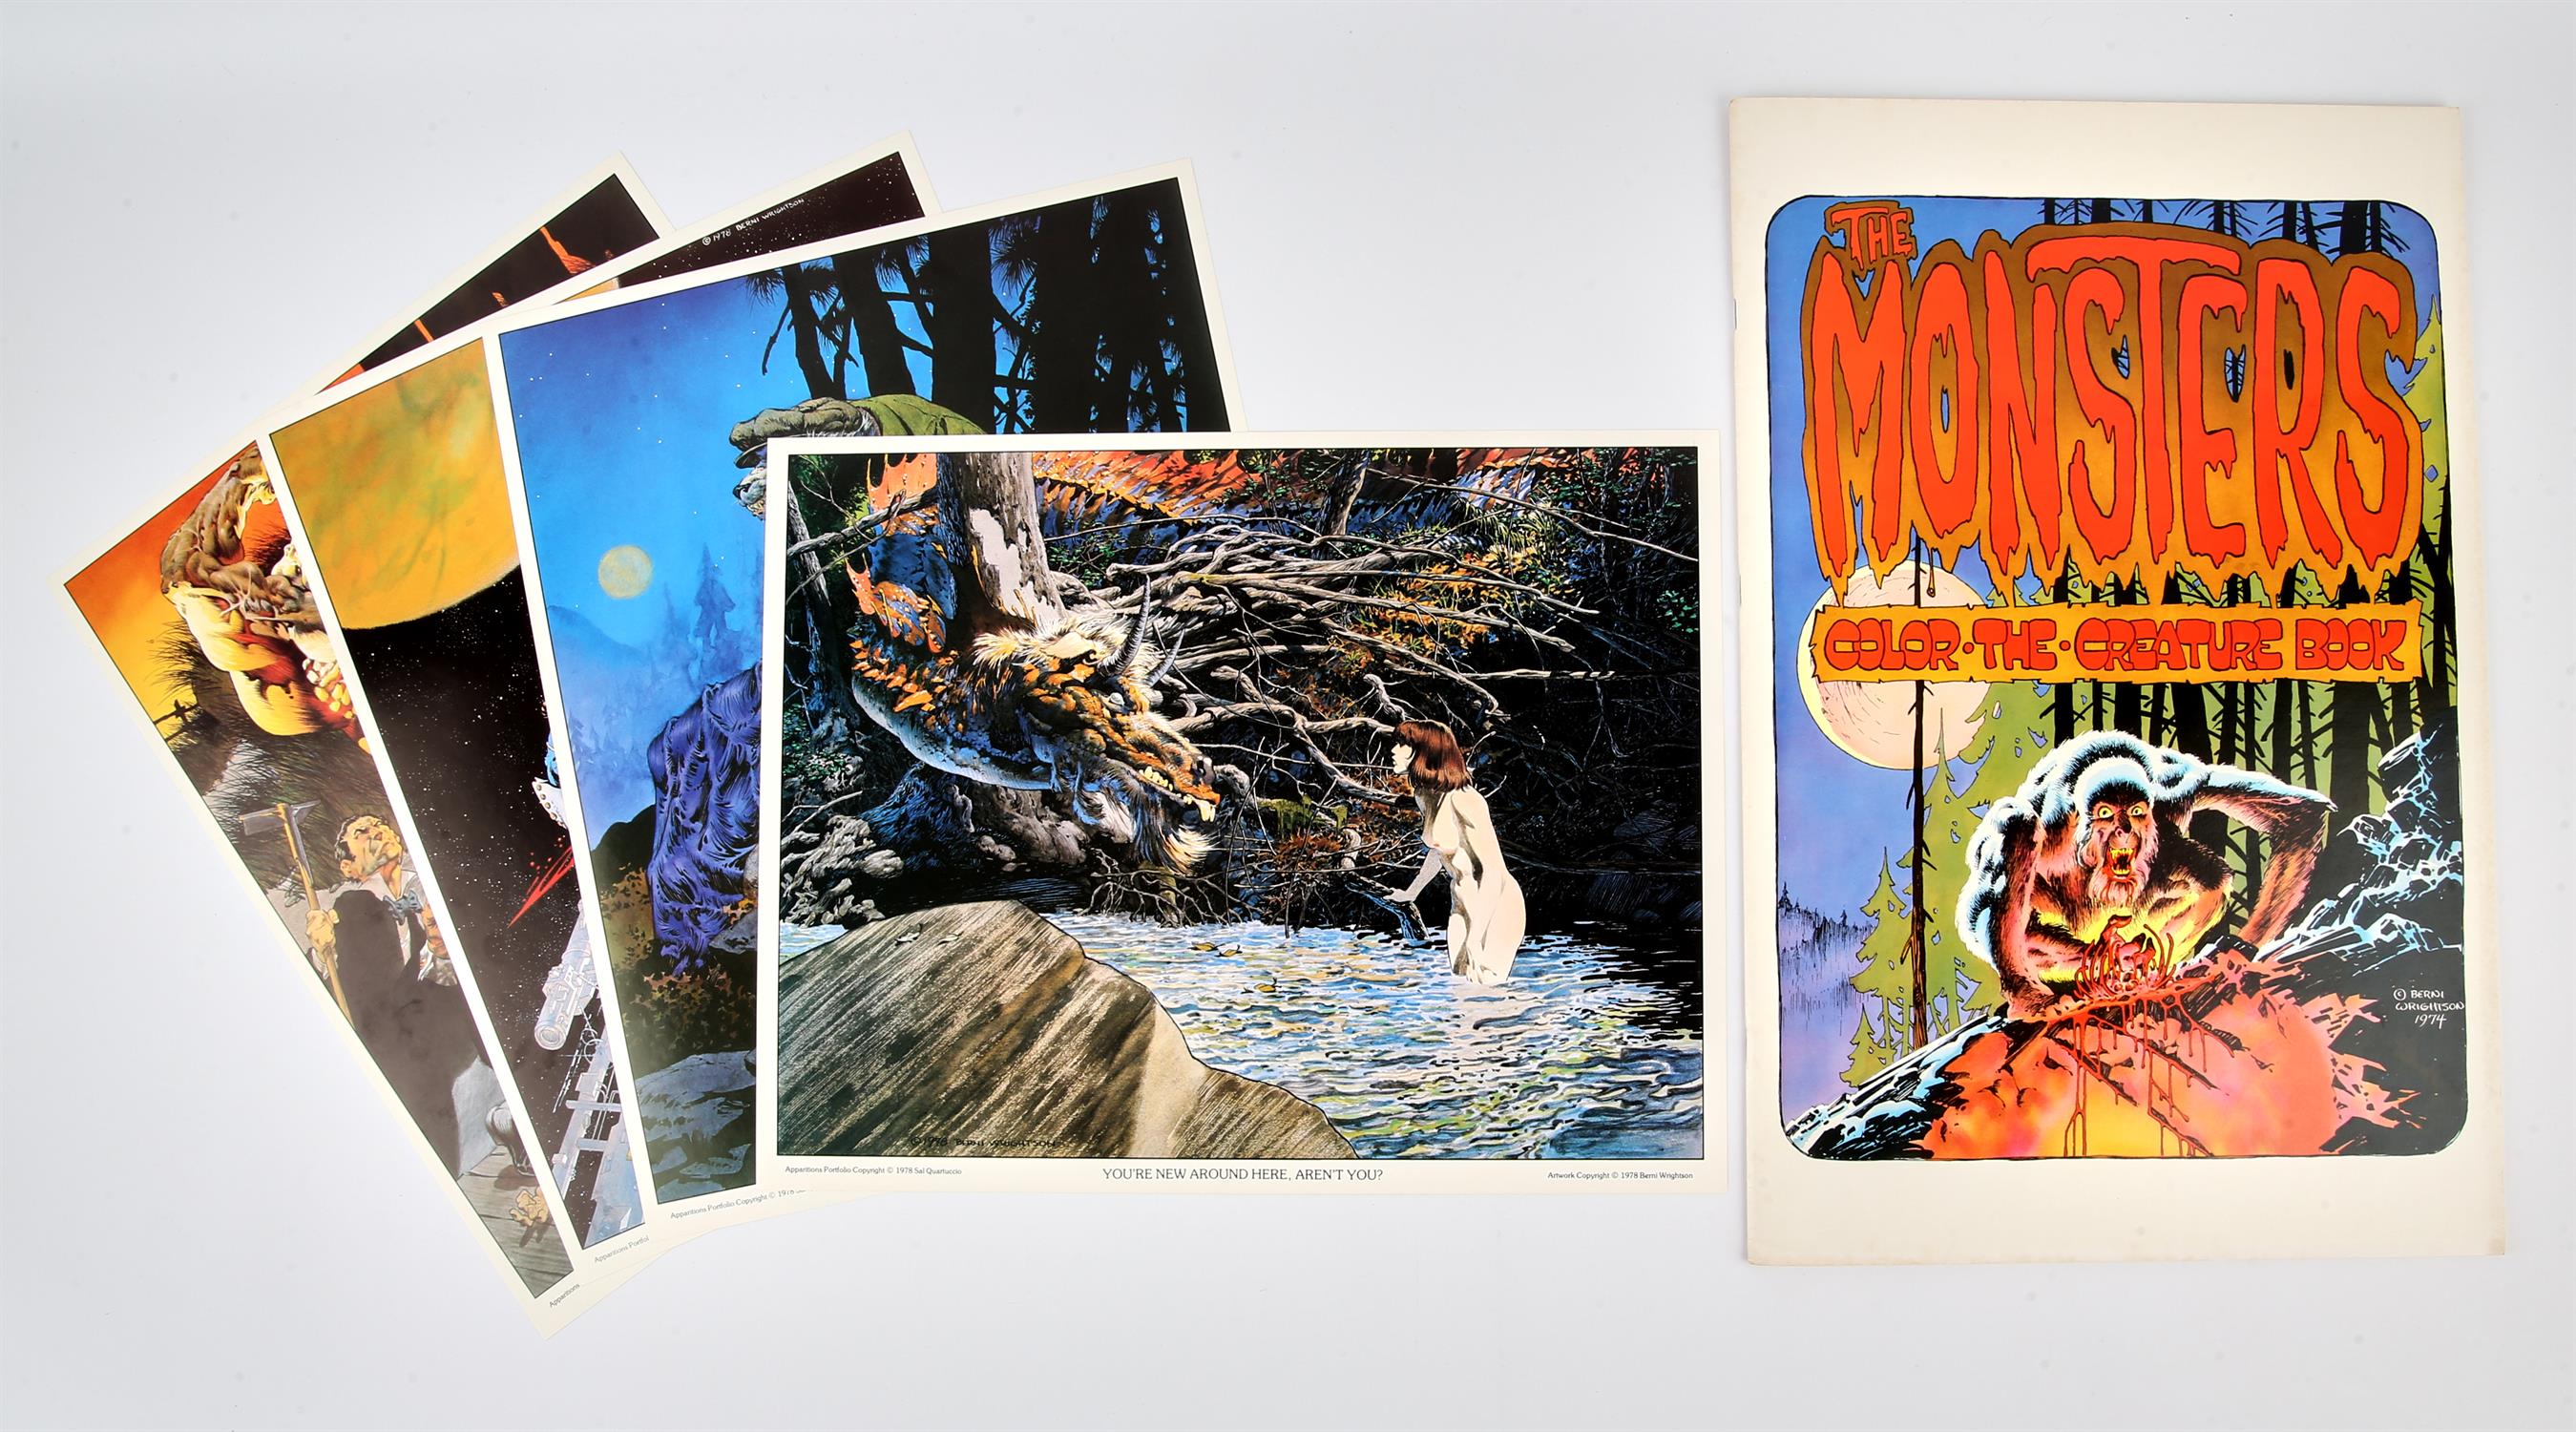 A collection of illustrated portfolios and art prints by Berni Wrightson. A collection of with